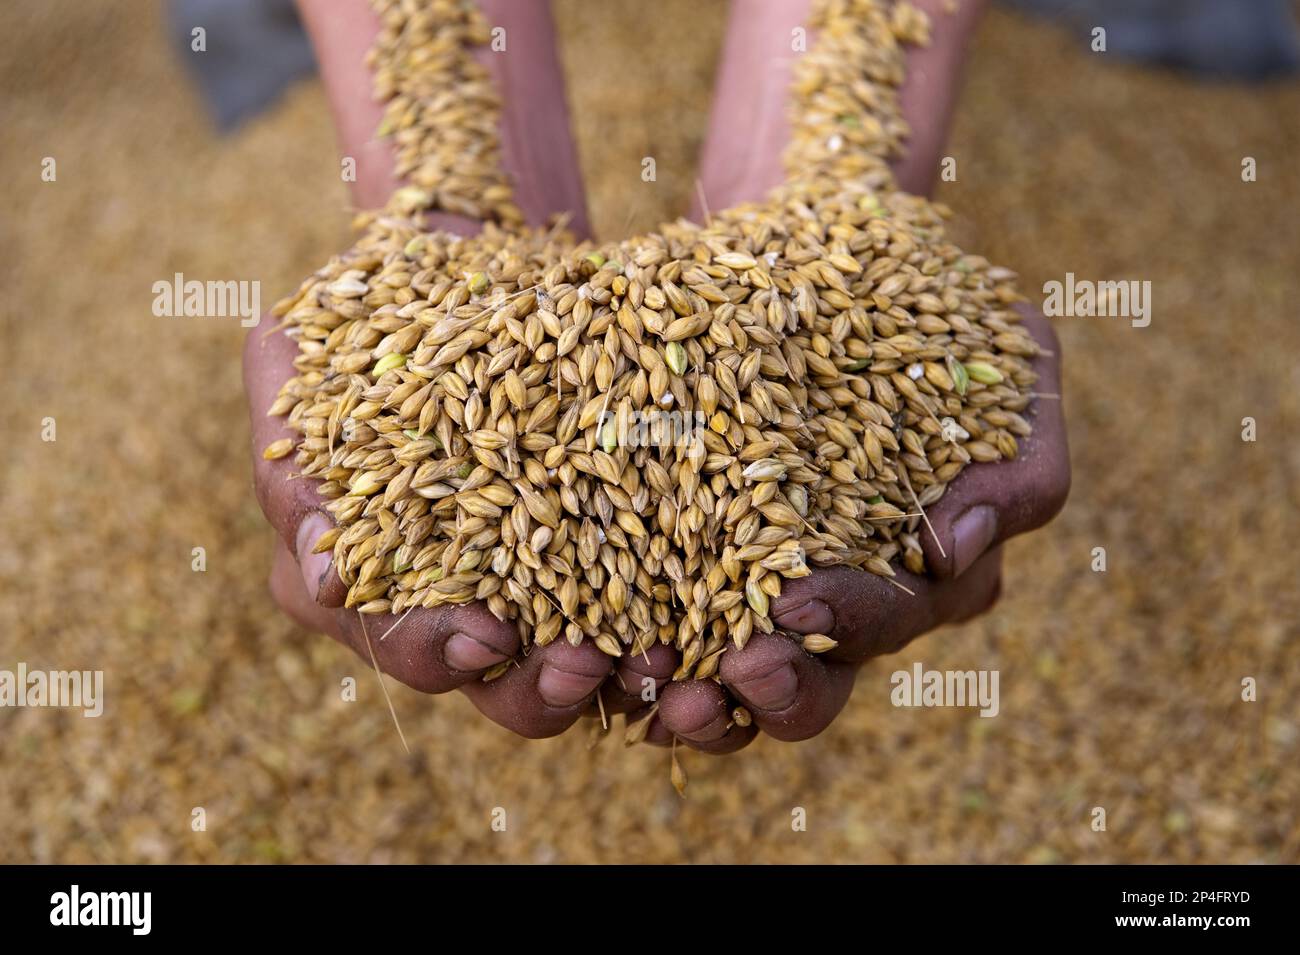 Barley (Hordeum vulgare), farmer with a handful of harvested seeds, England, United Kingdom Stock Photo